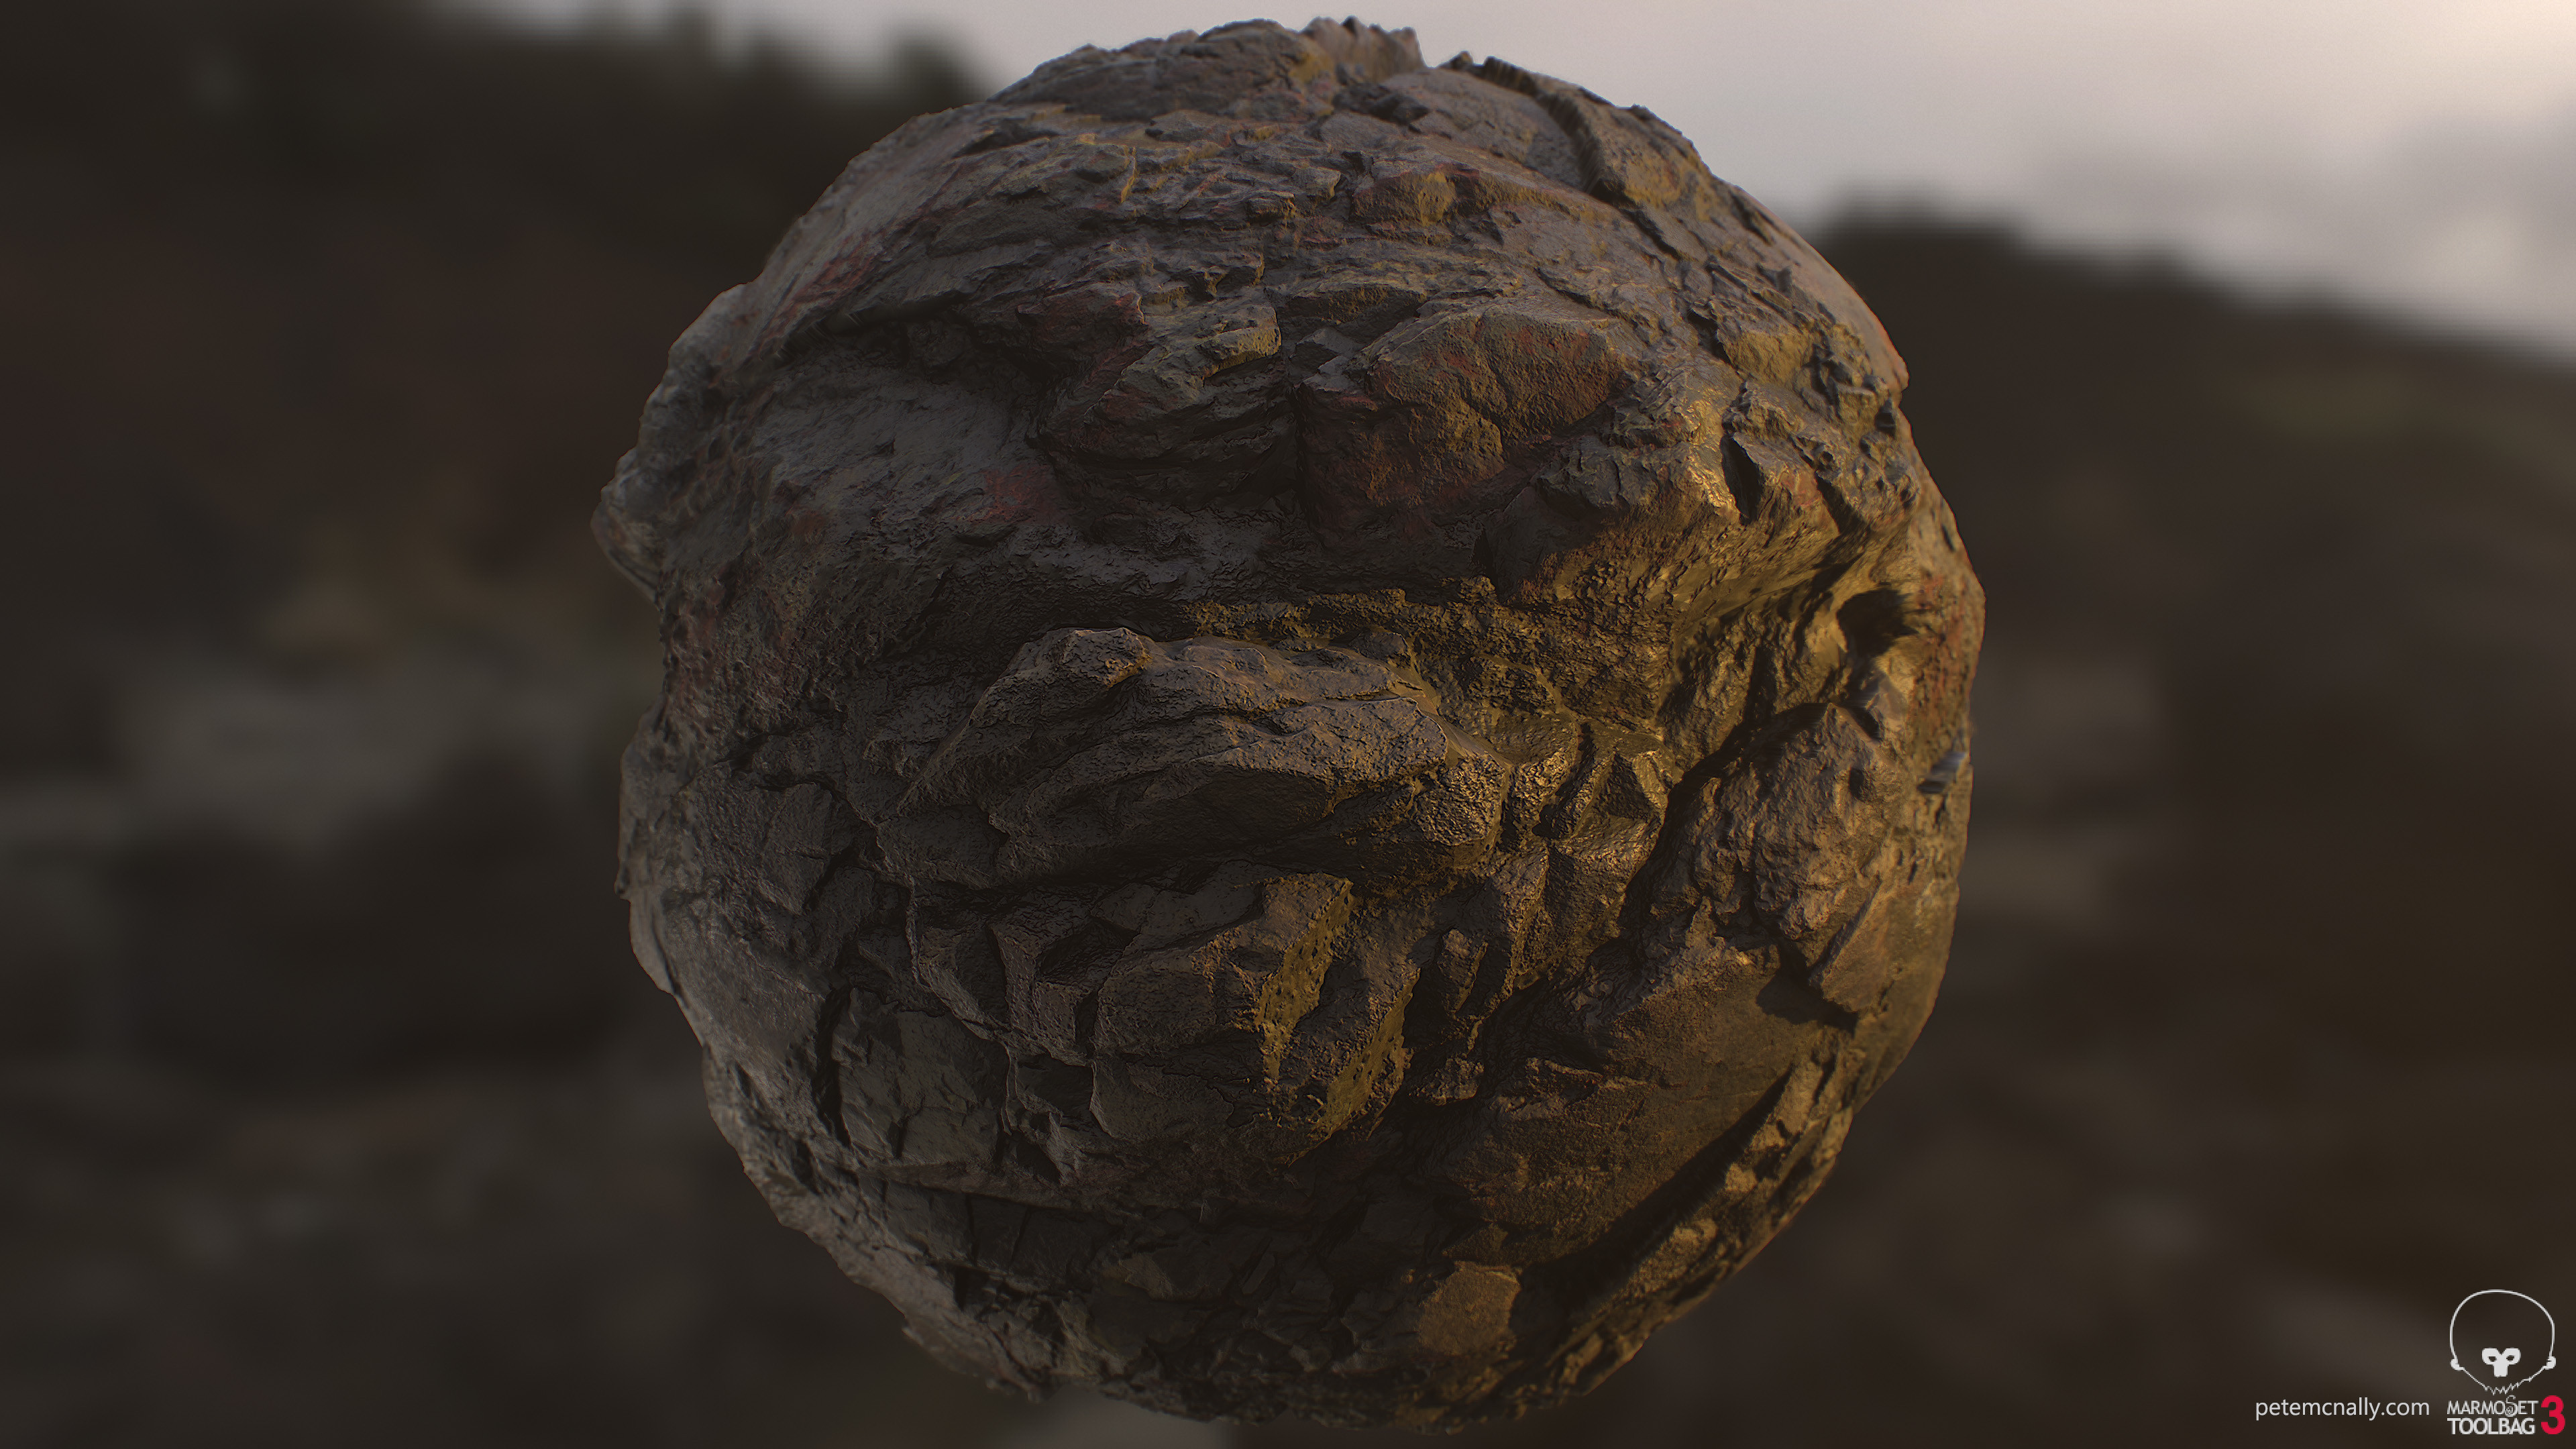 Cave material
Toolbag 3